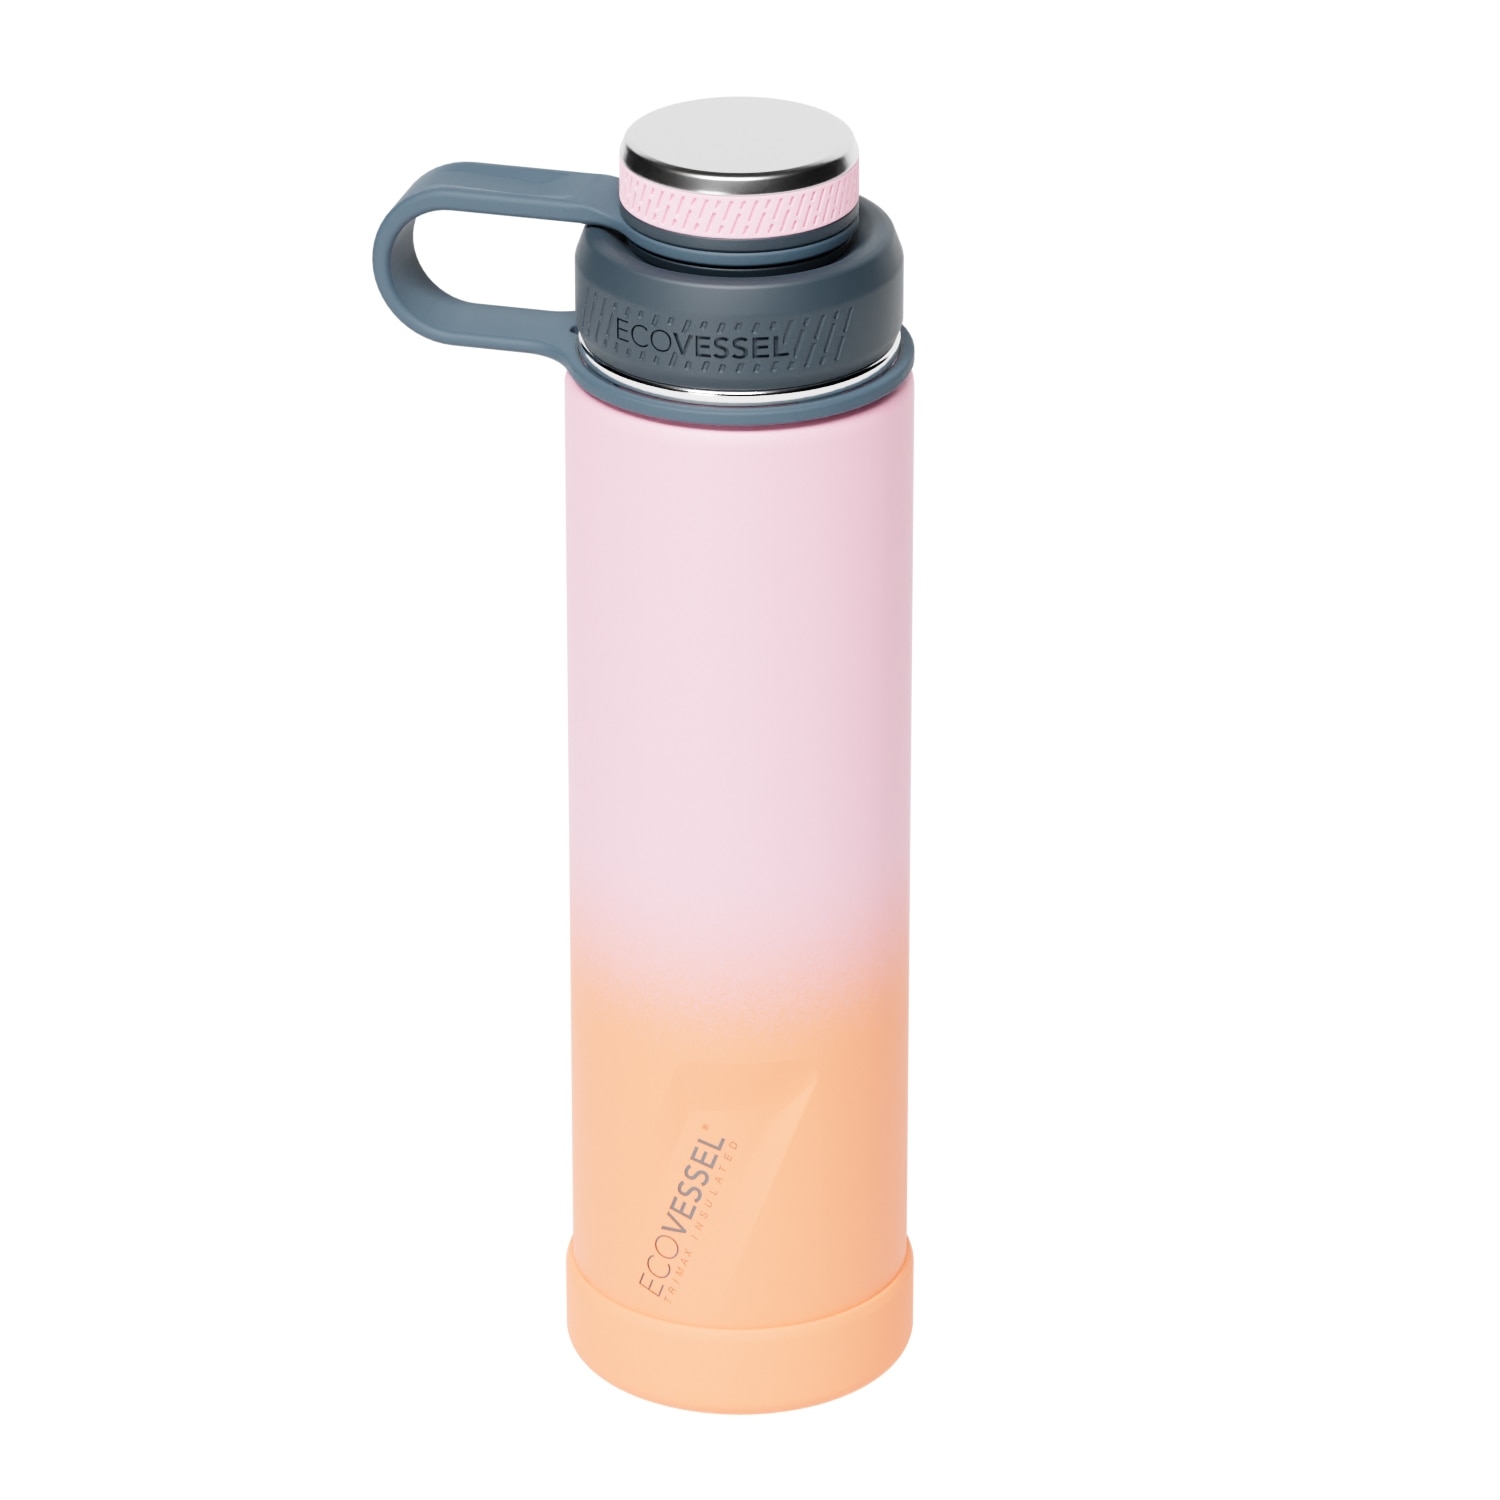 EcoVessel BOULDER 24oz - TriMax(R) Insulated Stainless Steel Water Bottle Coral Sands